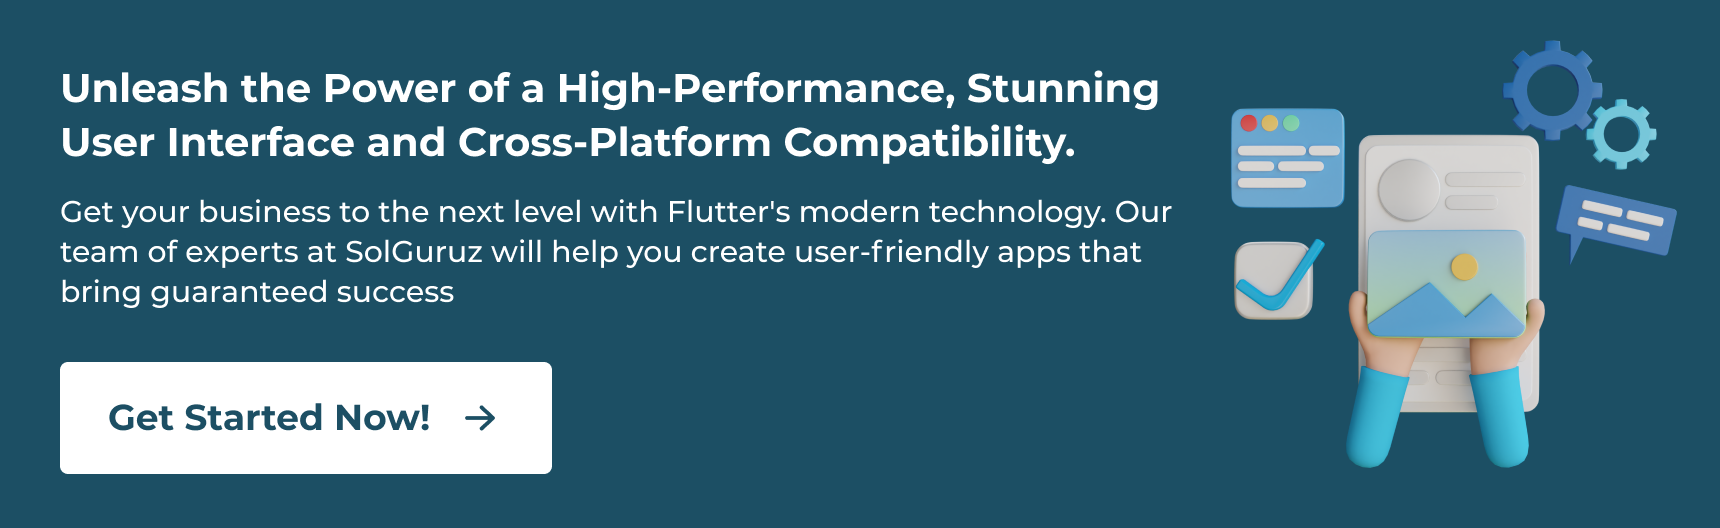 Get your business to the next level with Flutter app development with SolGuruz